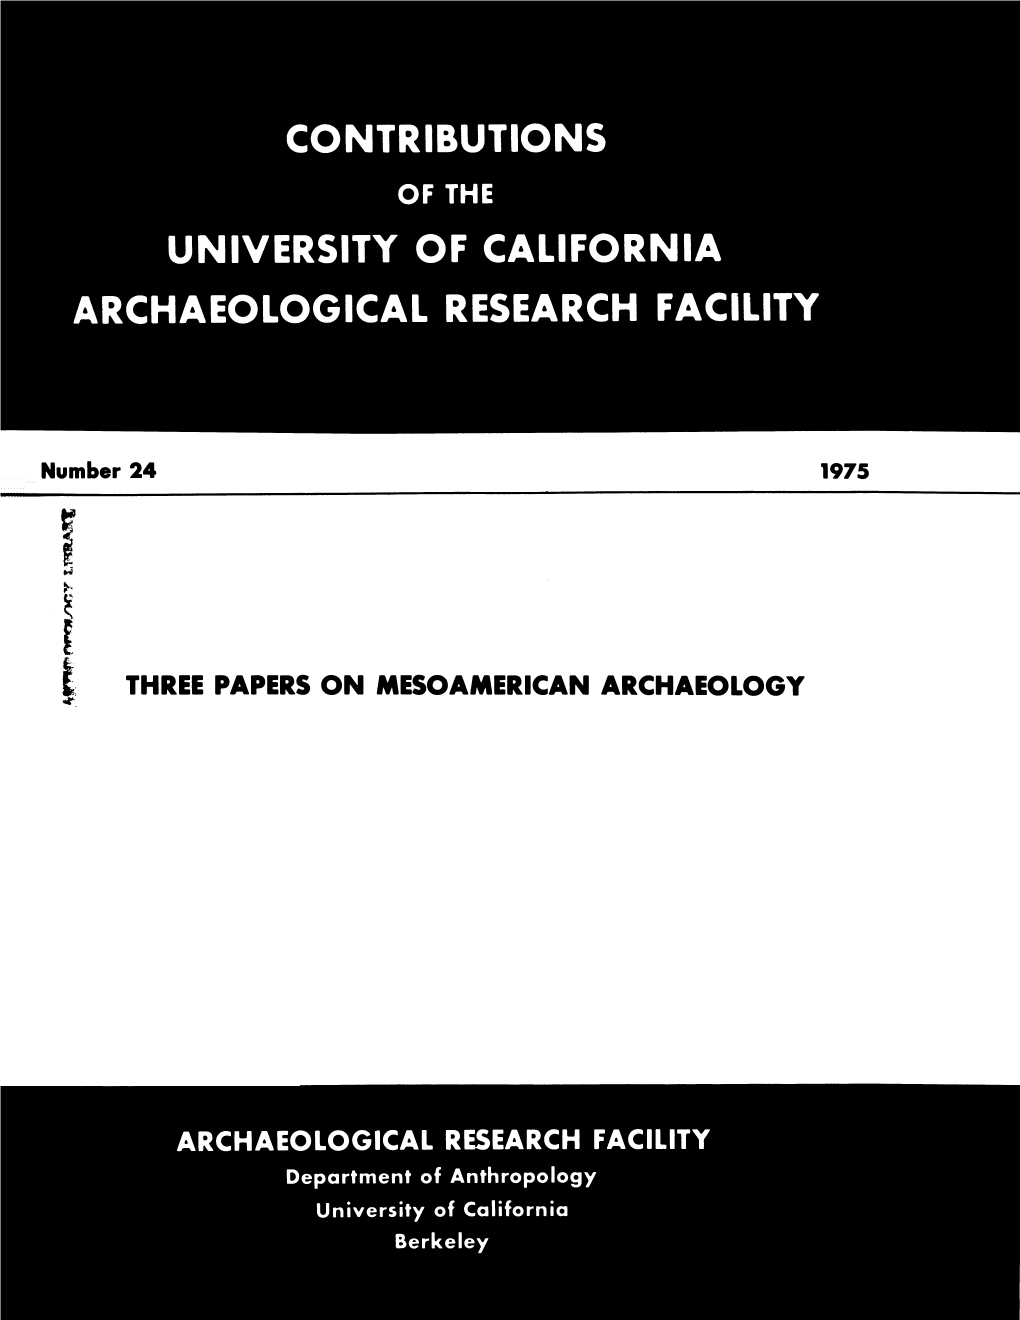 Three Papers on Mesoamerican Archaeology